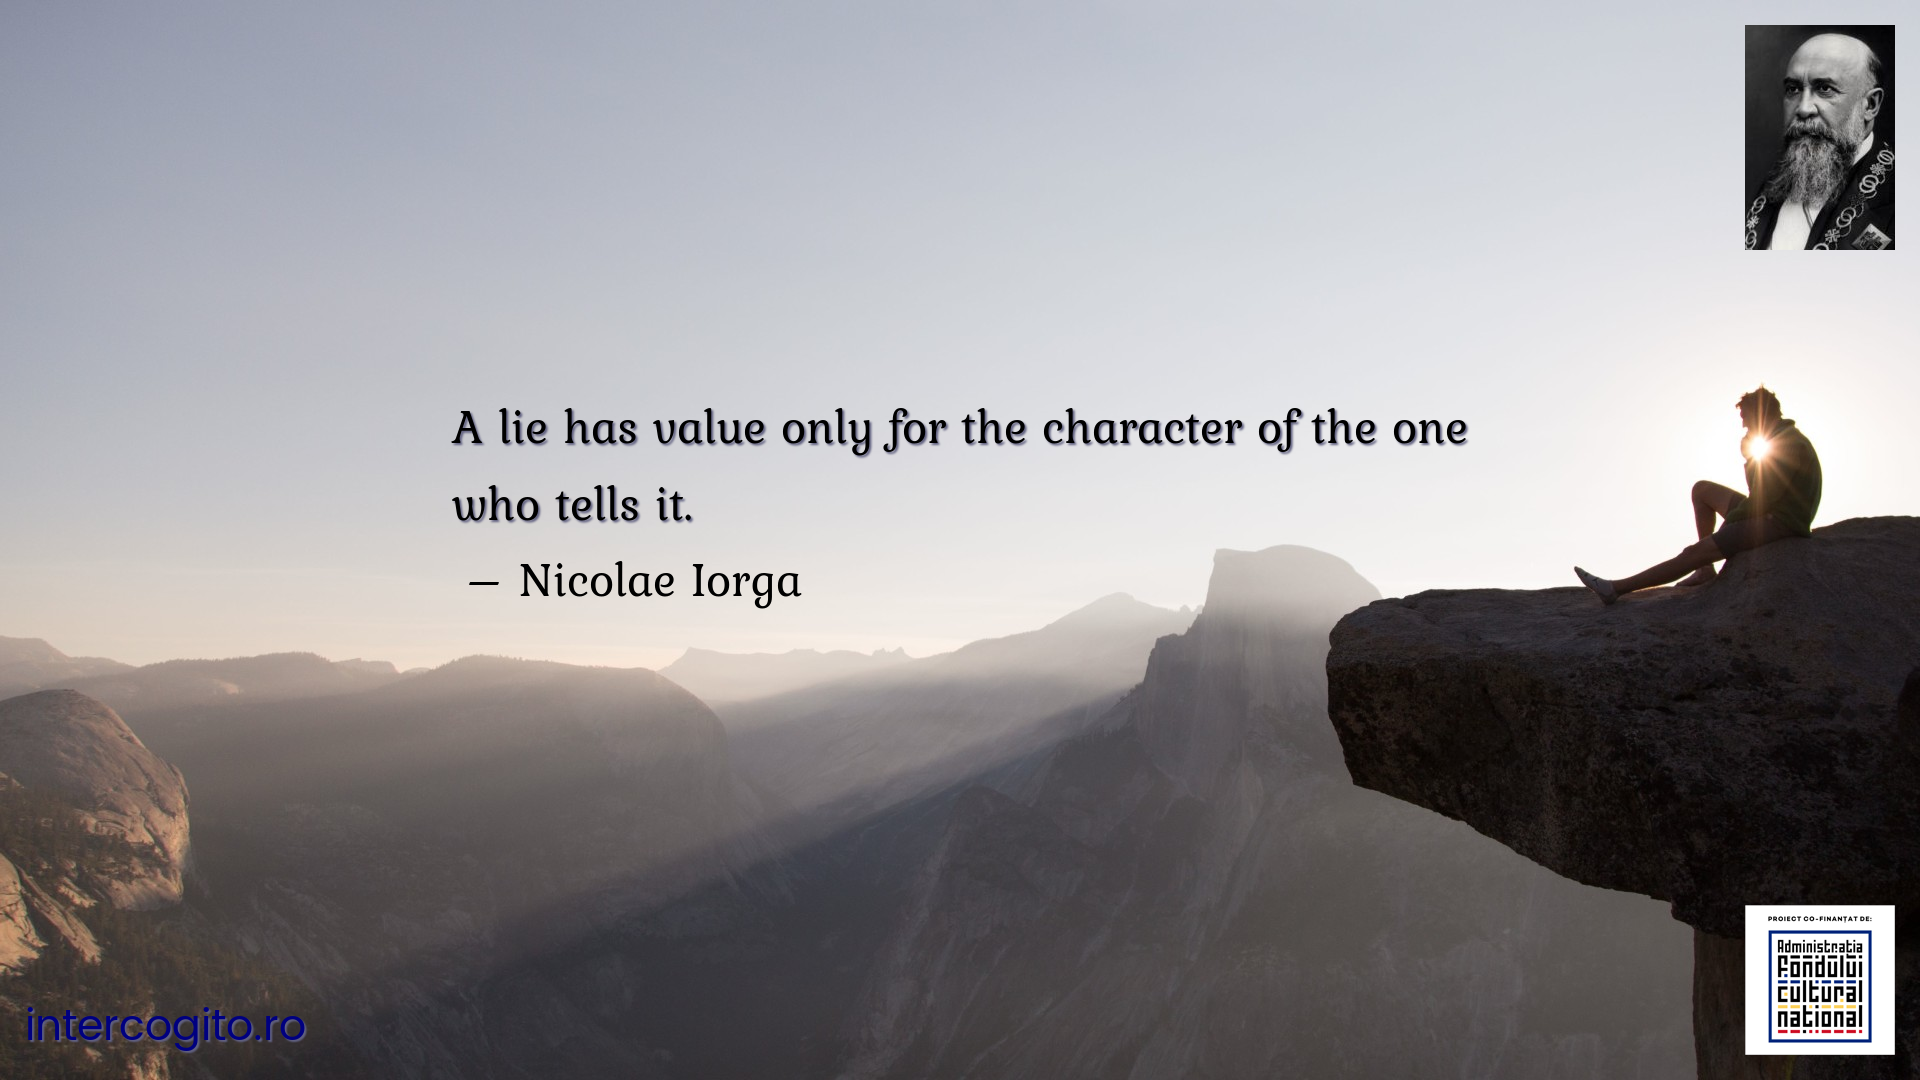 A lie has value only for the character of the one who tells it.